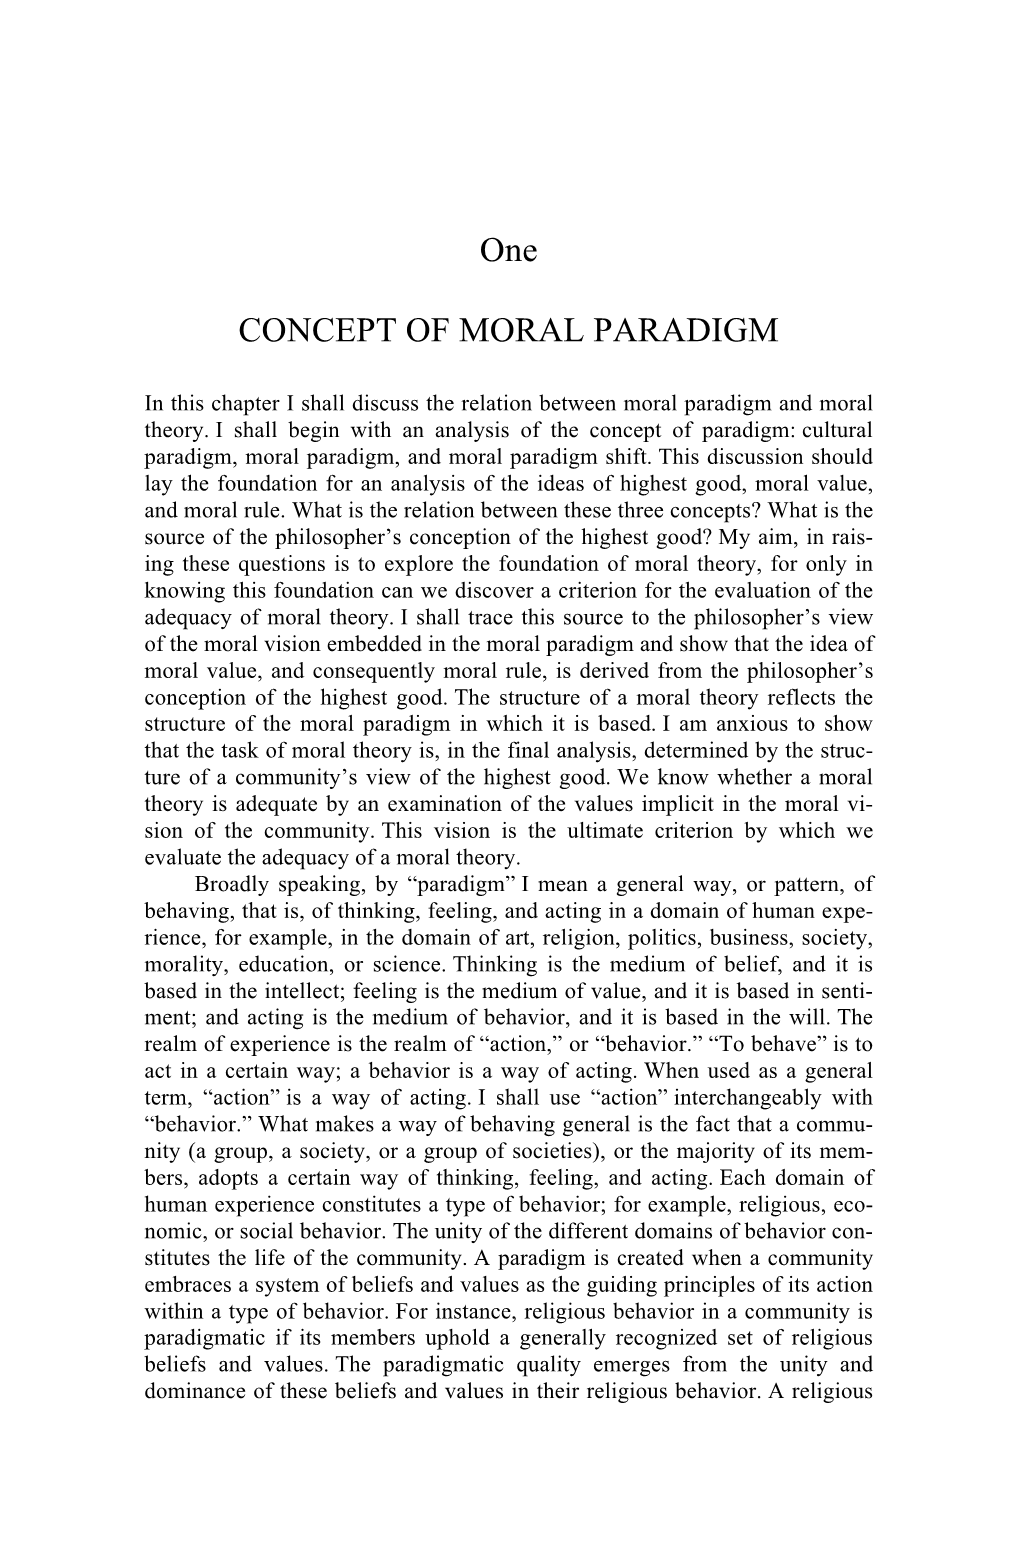 One CONCEPT of MORAL PARADIGM